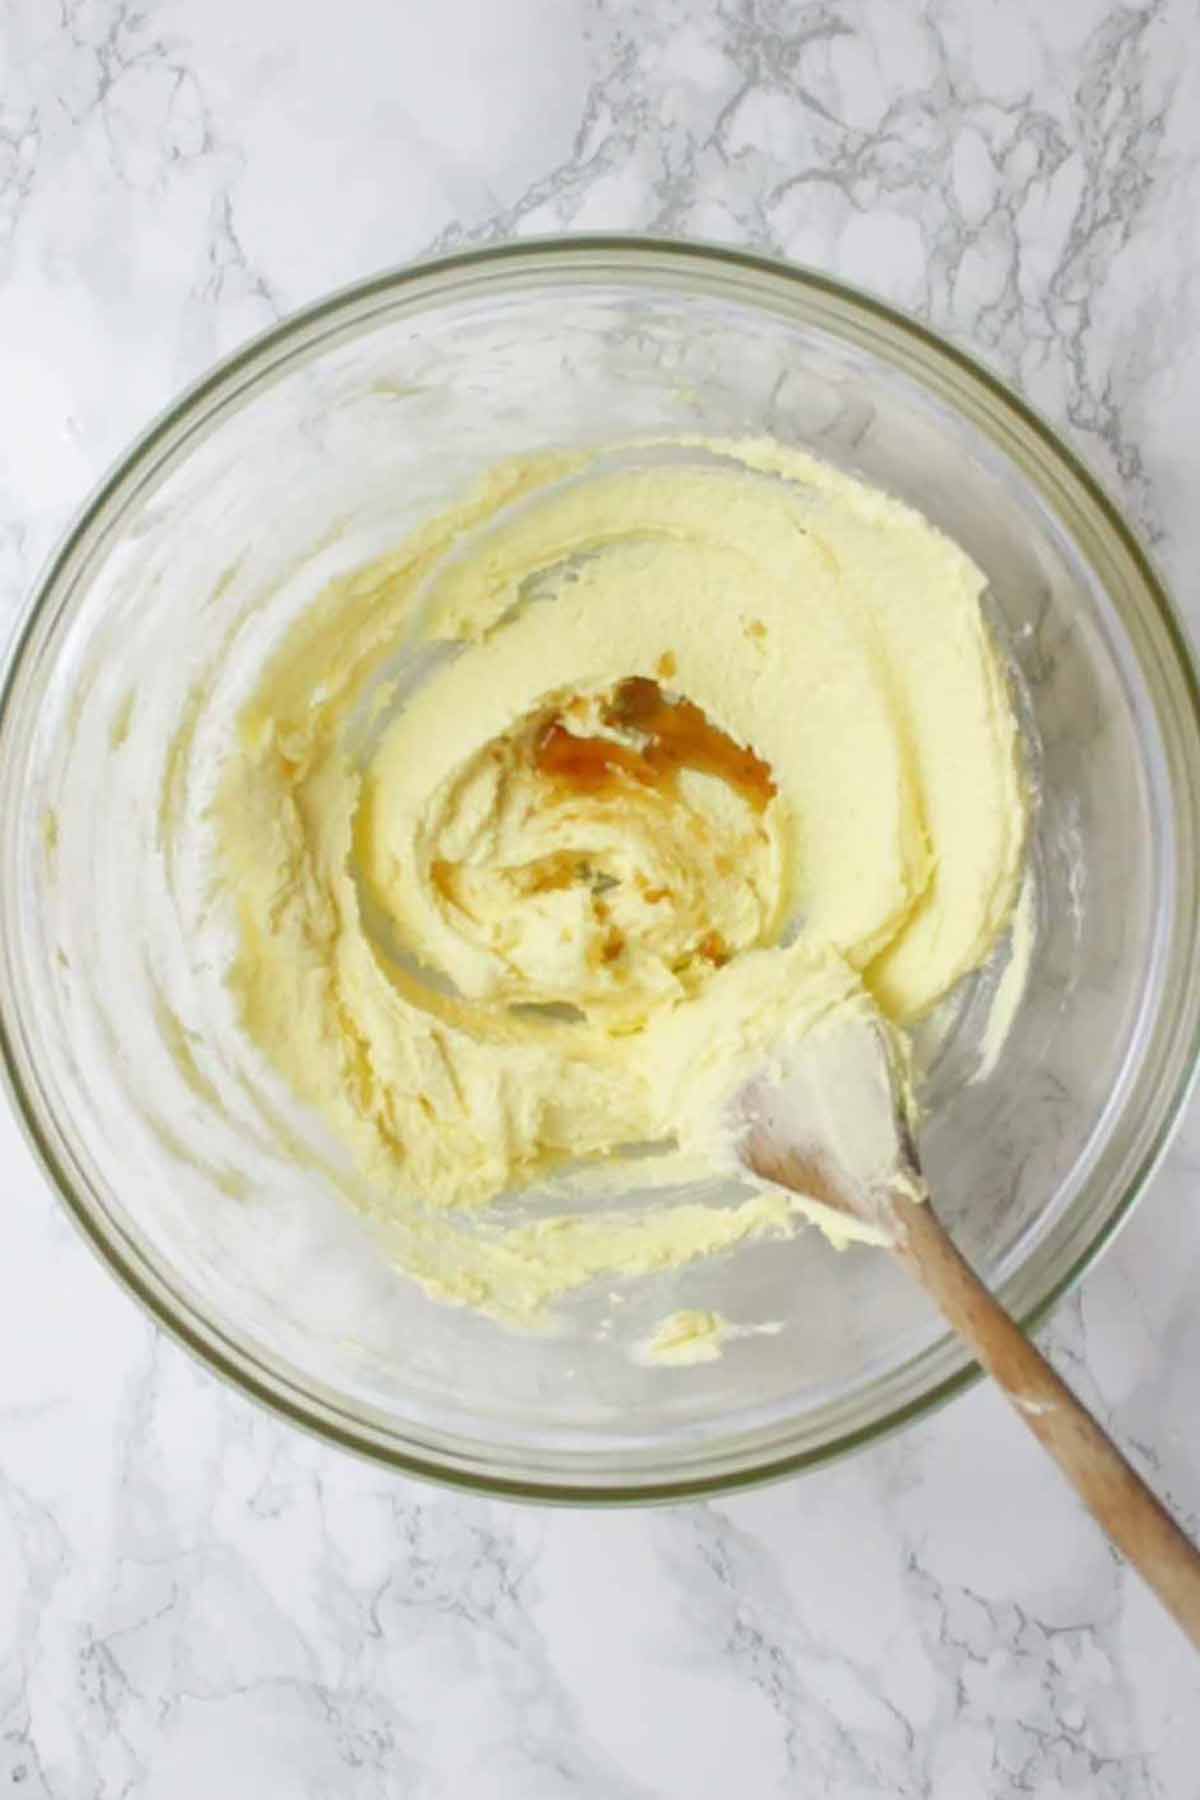 Sugar And Dairy Free Margarine Creamed In A Bowl